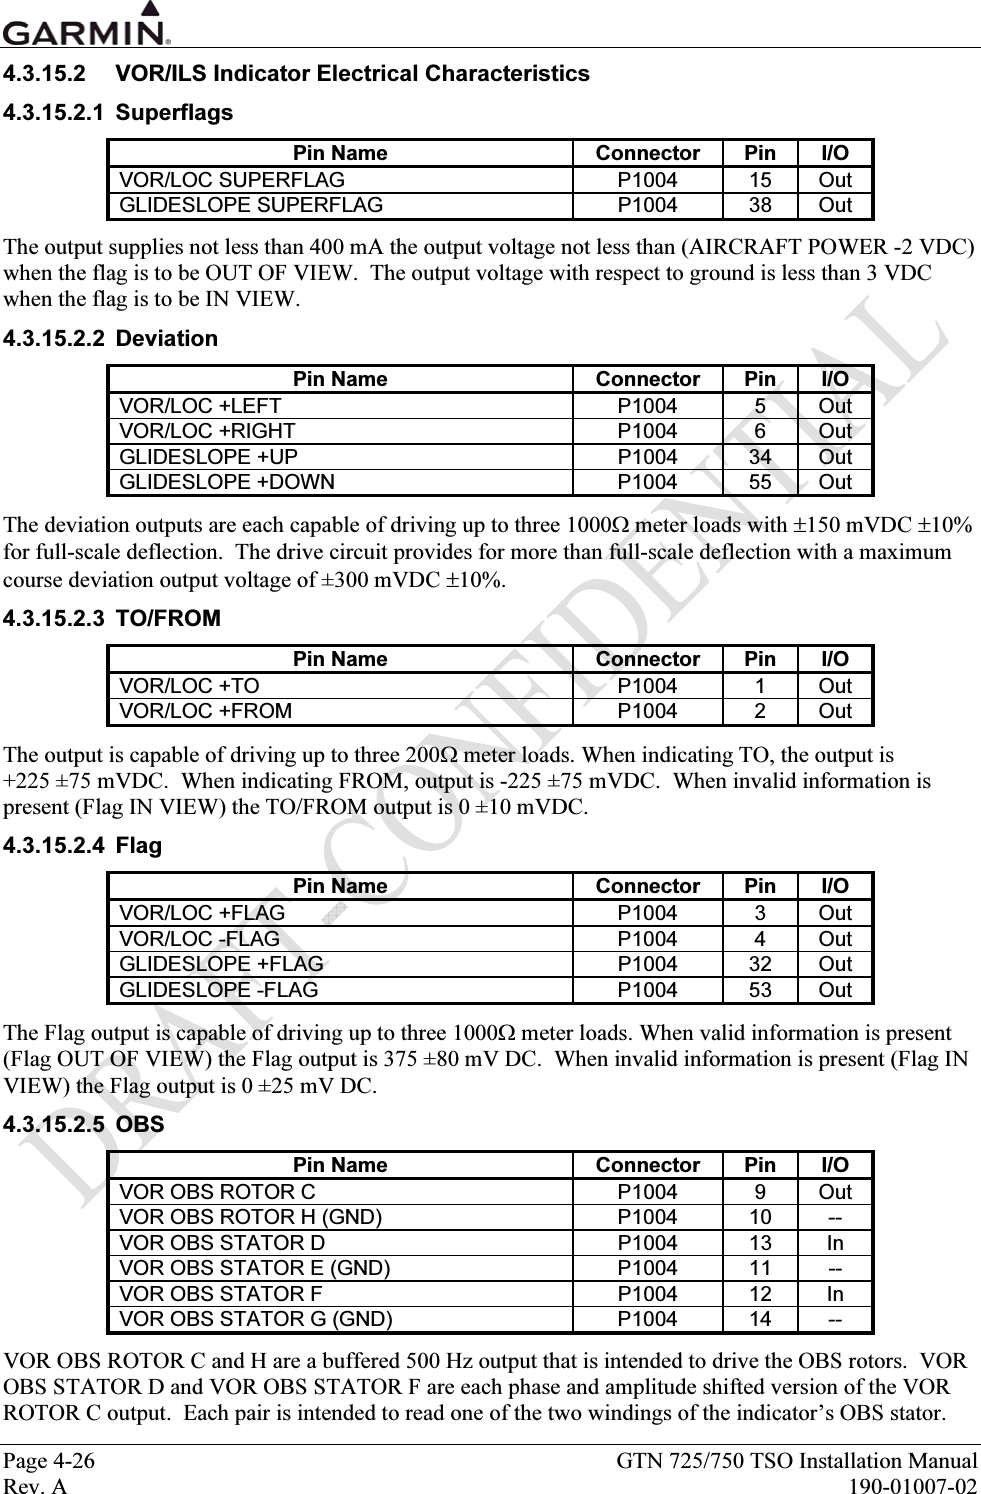  Page 4-26  GTN 725/750 TSO Installation Manual Rev. A  190-01007-02 4.3.15.2  VOR/ILS Indicator Electrical Characteristics 4.3.15.2.1 Superflags Pin Name  Connector  Pin  I/O VOR/LOC SUPERFLAG  P1004  15  Out GLIDESLOPE SUPERFLAG  P1004  38  Out The output supplies not less than 400 mA the output voltage not less than (AIRCRAFT POWER -2 VDC) when the flag is to be OUT OF VIEW.  The output voltage with respect to ground is less than 3 VDC when the flag is to be IN VIEW. 4.3.15.2.2 Deviation Pin Name  Connector  Pin  I/O VOR/LOC +LEFT  P1004  5  Out VOR/LOC +RIGHT  P1004  6  Out GLIDESLOPE +UP  P1004  34  Out GLIDESLOPE +DOWN  P1004  55  Out The deviation outputs are each capable of driving up to three 1000Ω meter loads with ±150 mVDC ±10% for full-scale deflection.  The drive circuit provides for more than full-scale deflection with a maximum course deviation output voltage of ±300 mVDC ±10%. 4.3.15.2.3 TO/FROM Pin Name  Connector  Pin  I/O VOR/LOC +TO  P1004  1  Out VOR/LOC +FROM   P1004  2  Out The output is capable of driving up to three 200Ω meter loads. When indicating TO, the output is +225 ±75 mVDC.  When indicating FROM, output is -225 ±75 mVDC.  When invalid information is present (Flag IN VIEW) the TO/FROM output is 0 ±10 mVDC. 4.3.15.2.4 Flag Pin Name  Connector  Pin  I/O VOR/LOC +FLAG  P1004  3  Out VOR/LOC -FLAG  P1004  4  Out GLIDESLOPE +FLAG  P1004  32  Out GLIDESLOPE -FLAG  P1004  53  Out The Flag output is capable of driving up to three 1000Ω meter loads. When valid information is present (Flag OUT OF VIEW) the Flag output is 375 ±80 mV DC.  When invalid information is present (Flag IN VIEW) the Flag output is 0 ±25 mV DC. 4.3.15.2.5 OBS Pin Name  Connector  Pin  I/O VOR OBS ROTOR C  P1004  9  Out VOR OBS ROTOR H (GND)  P1004  10  -- VOR OBS STATOR D  P1004  13  In VOR OBS STATOR E (GND)  P1004  11  -- VOR OBS STATOR F  P1004  12  In VOR OBS STATOR G (GND)  P1004  14  -- VOR OBS ROTOR C and H are a buffered 500 Hz output that is intended to drive the OBS rotors.  VOR OBS STATOR D and VOR OBS STATOR F are each phase and amplitude shifted version of the VOR ROTOR C output.  Each pair is intended to read one of the two windings of the indicator’s OBS stator. 